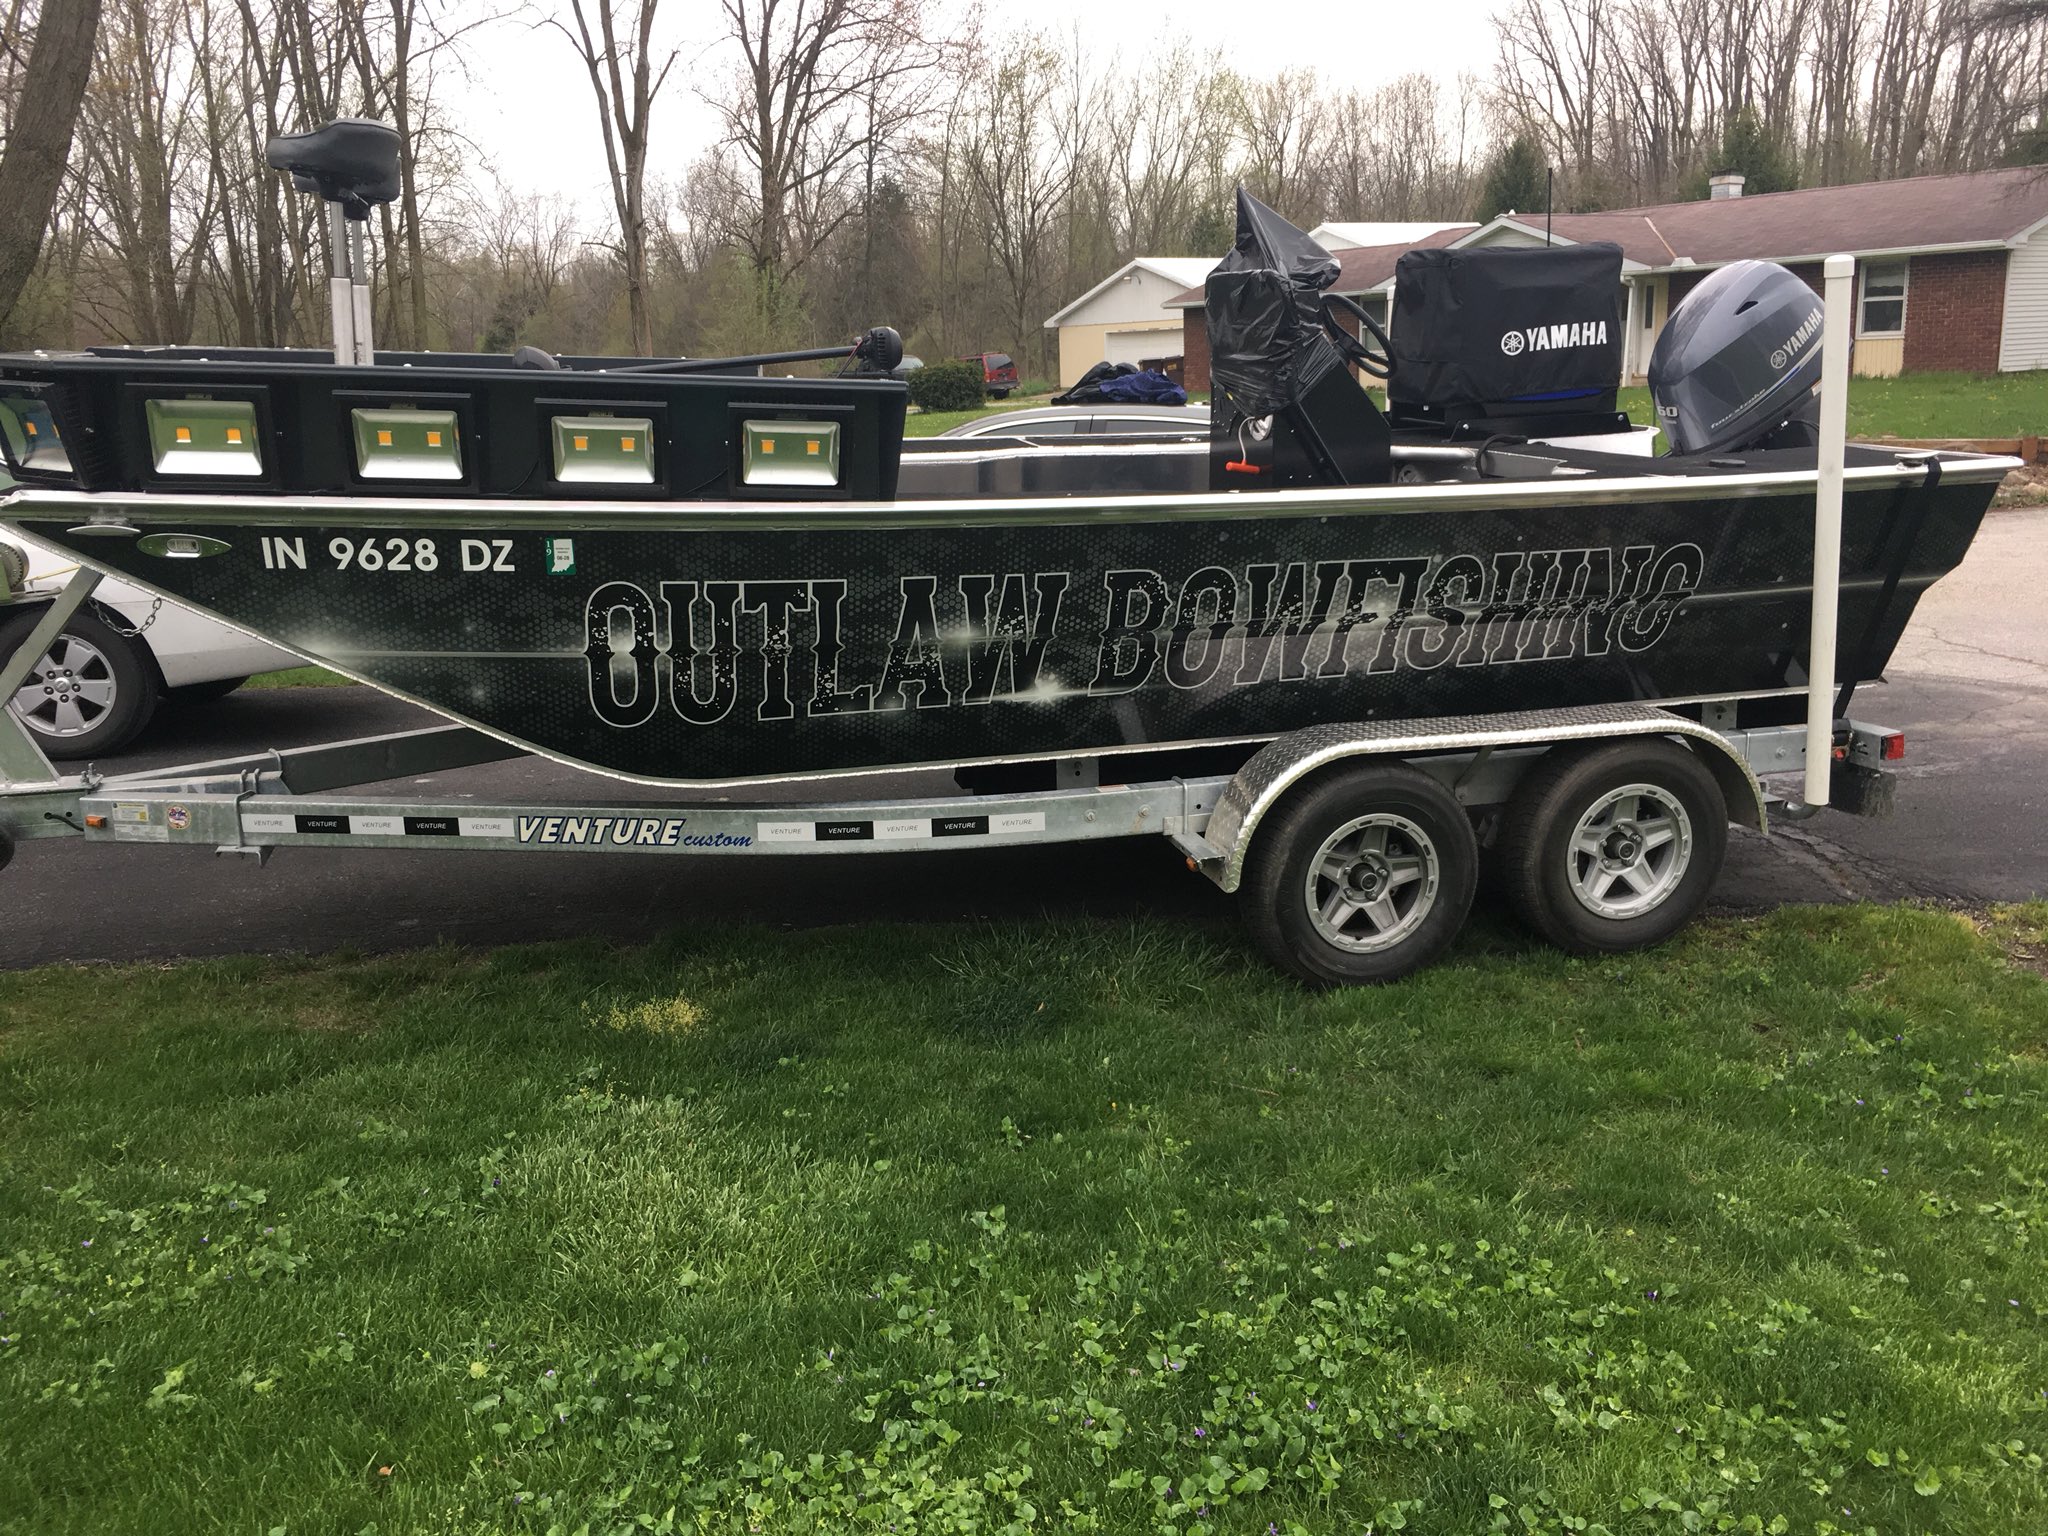 Kevin Kiermaier on X: Sneak peek of my new bowfishing boatwill be  posting more and more as i live vicariously thru my lil bro who will be  using this way more than